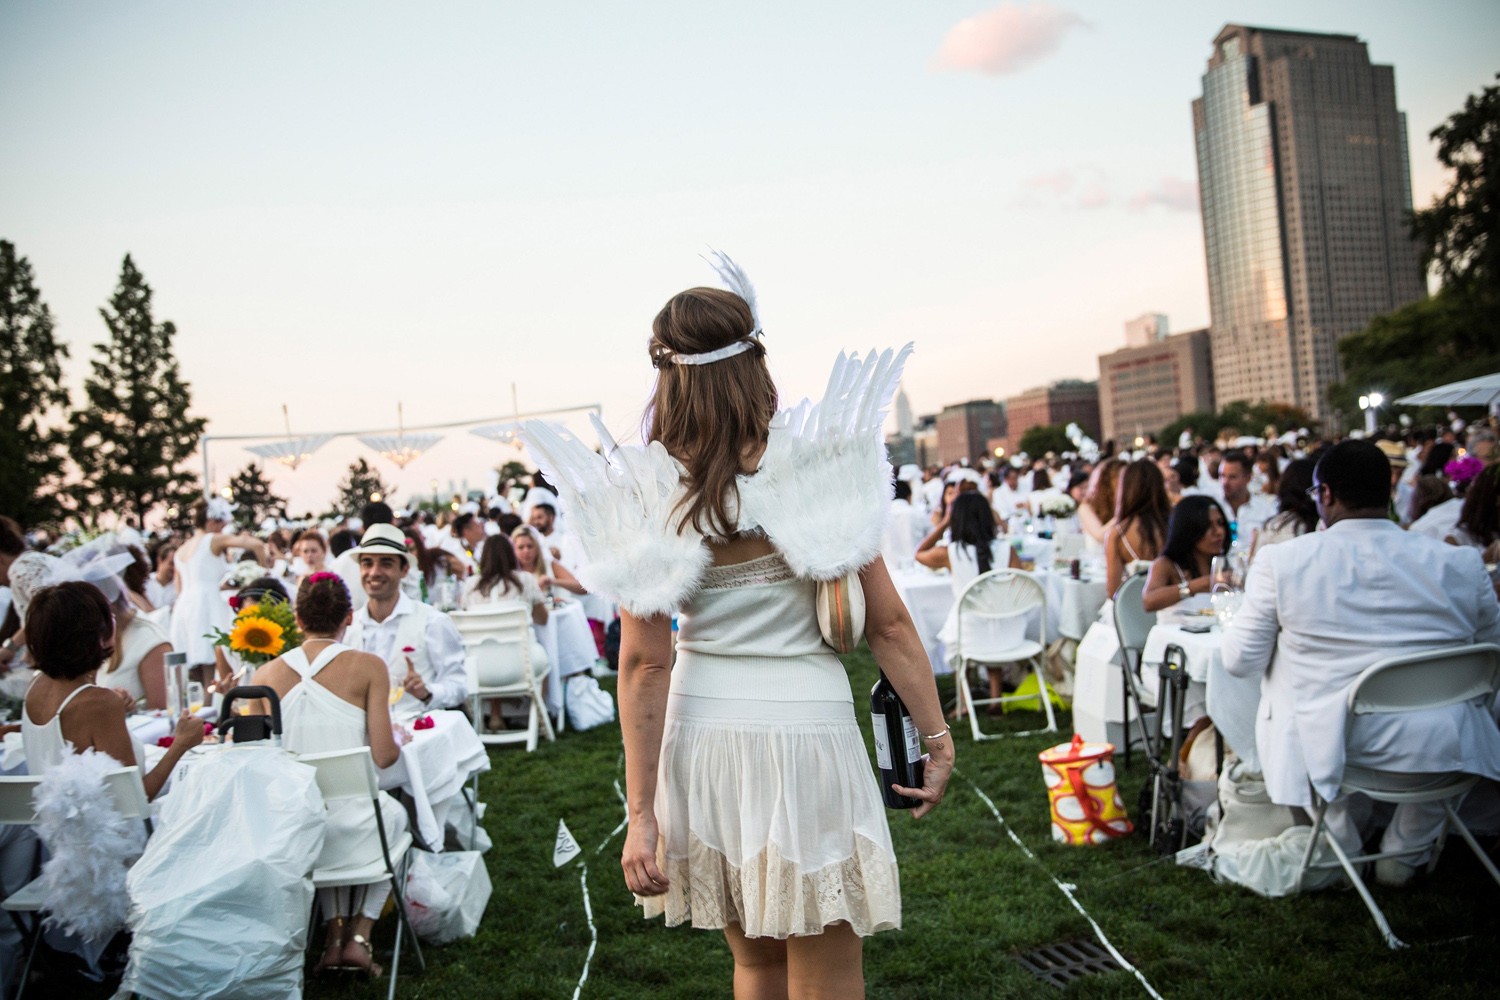 A woman wearing wings attends Diner en Blanc (French for Dinner in White), a pop-up dinner held once a year in New York City on Aug. 25, 2014.